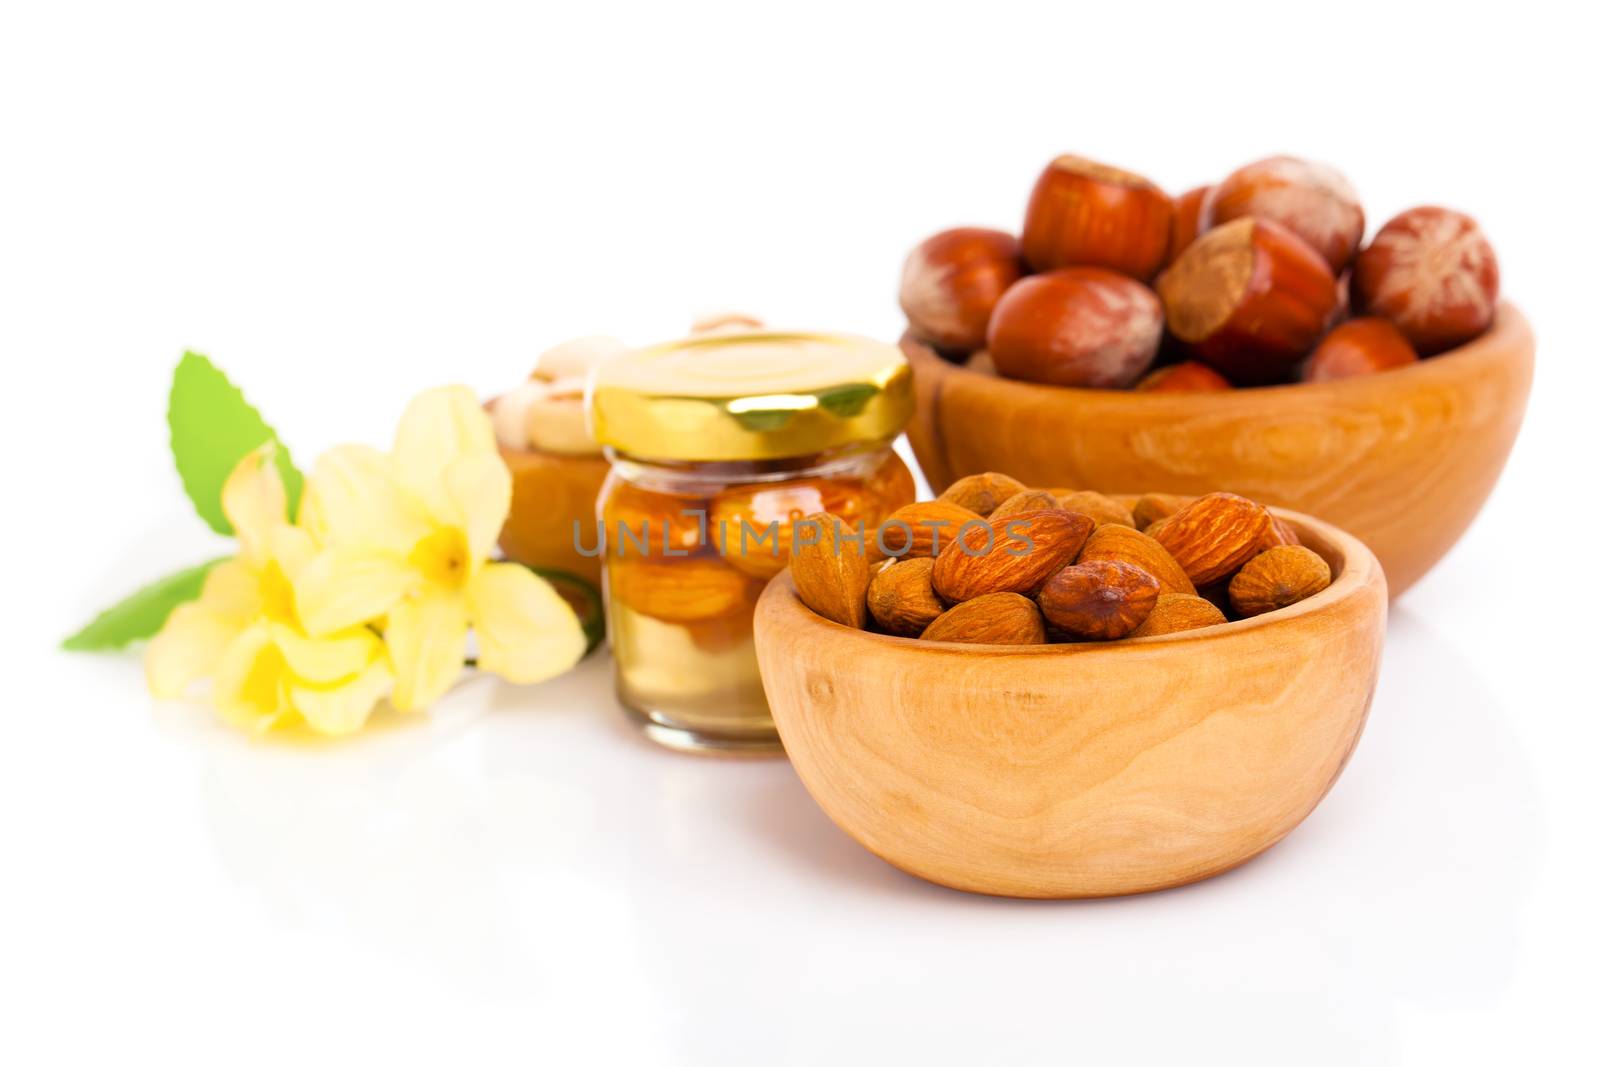 Hazelnuts in a wooden bowl on white background